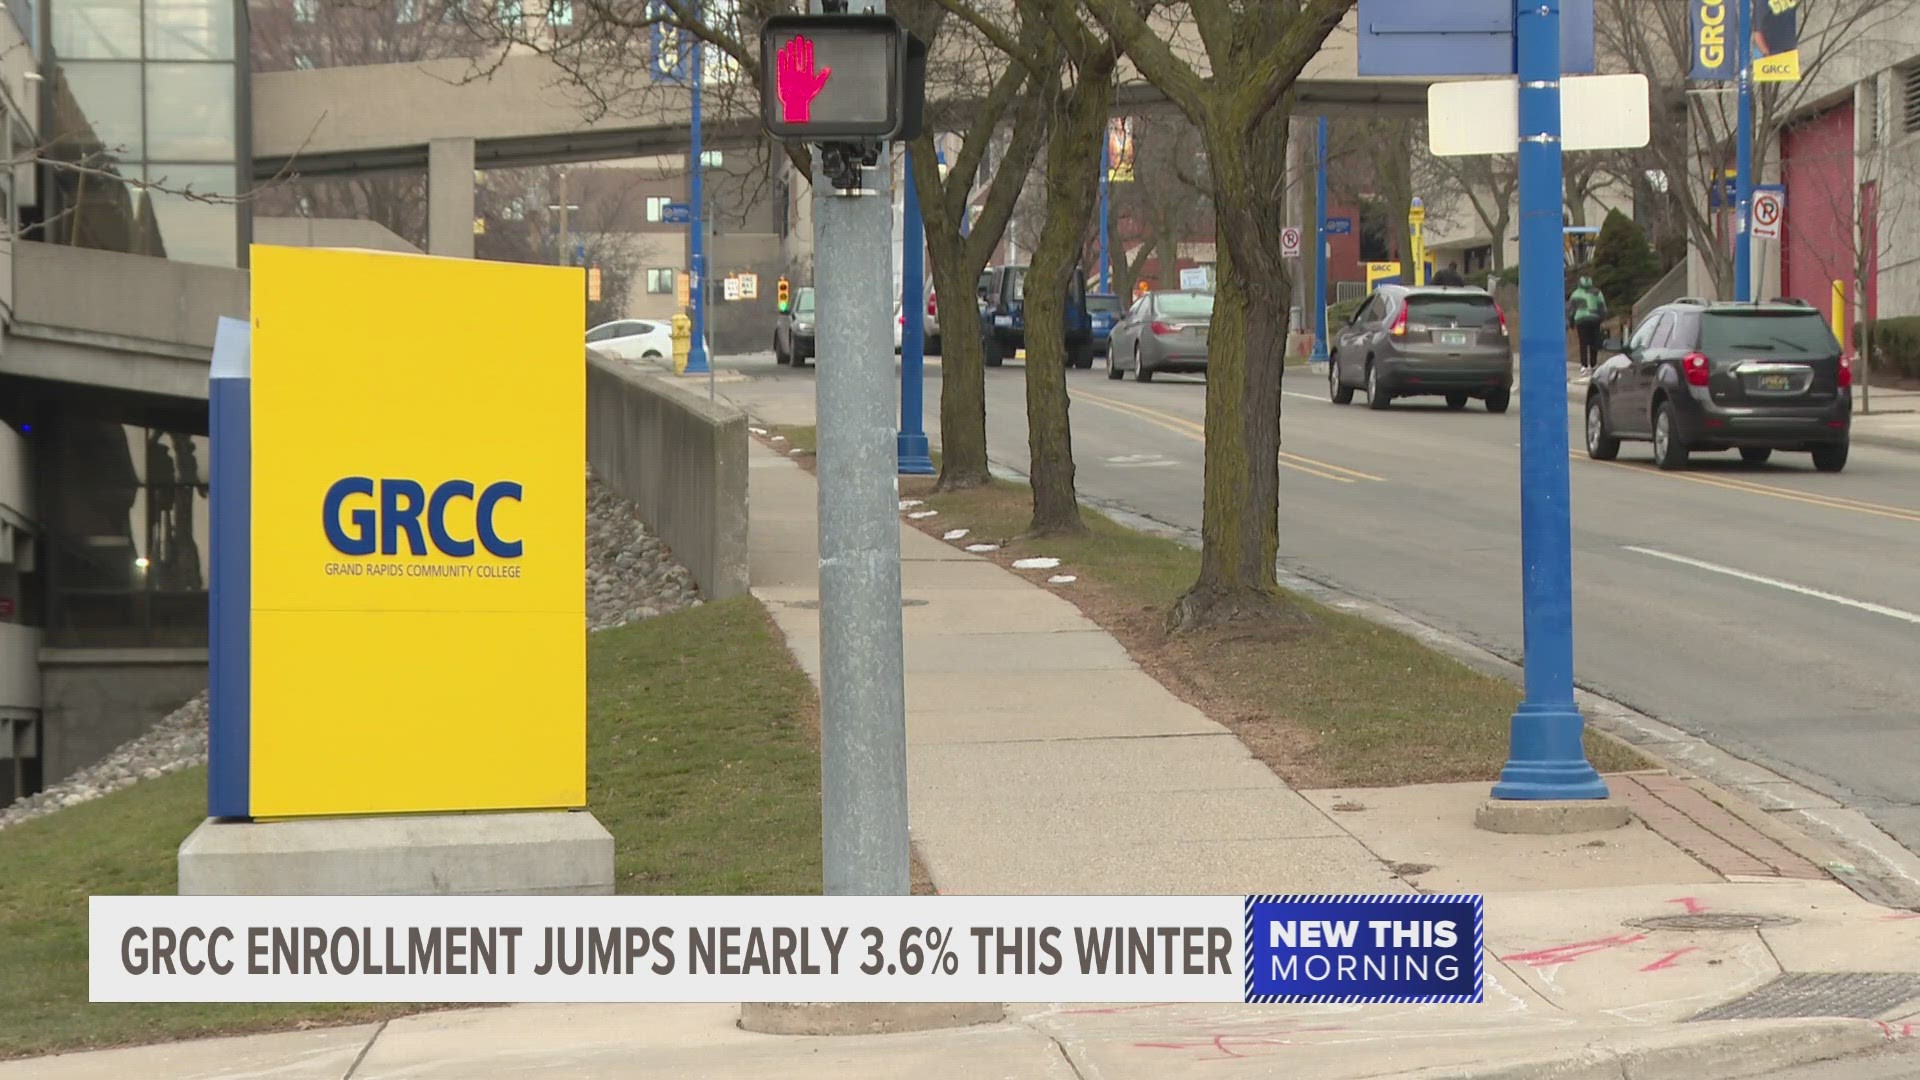 School leaders say programs like the Michigan Reconnect effort have helped with that boost, as well as GRCC's commitment to job training and community outreach.